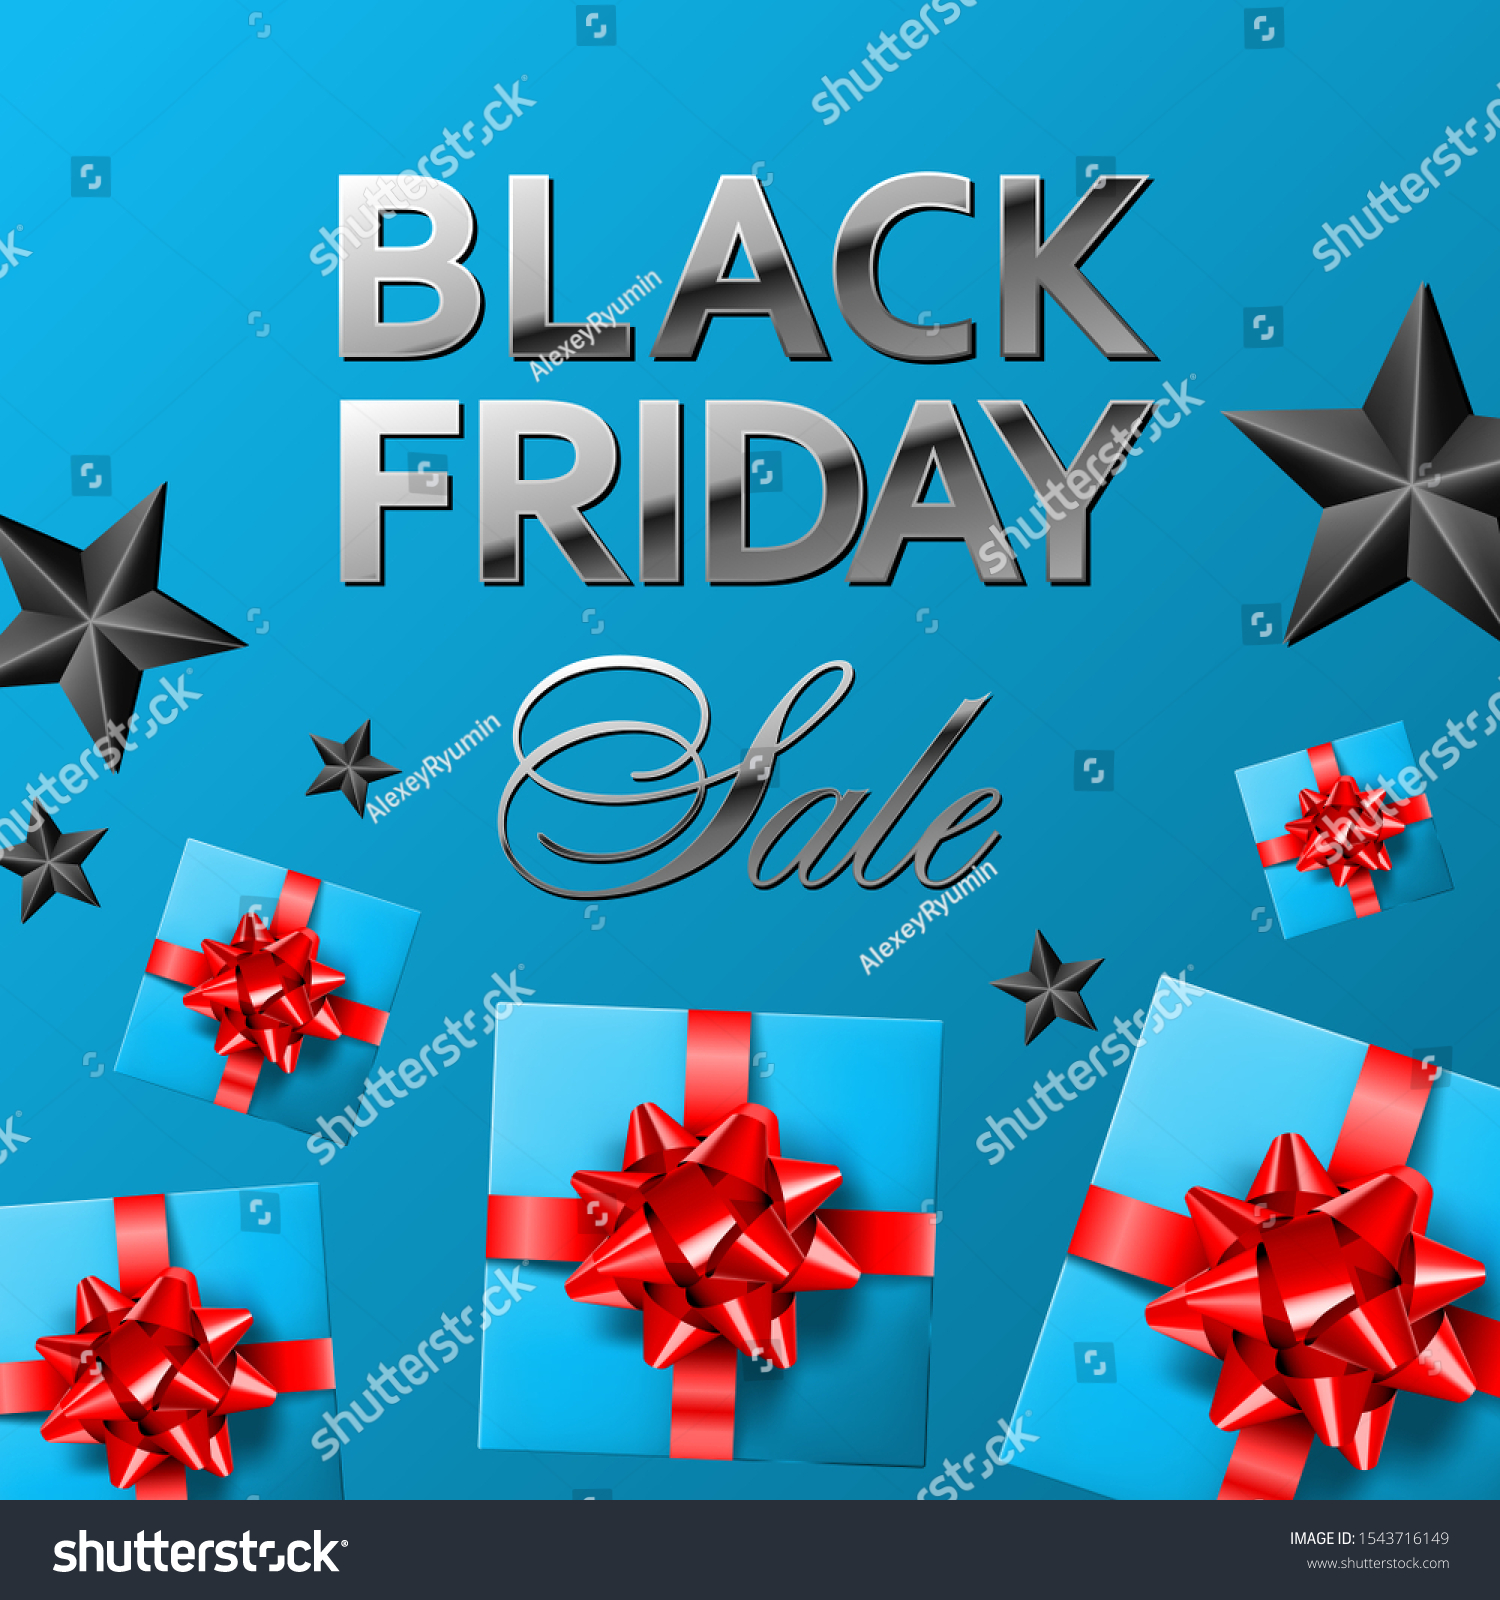 Sky blue square Black Friday Sale banner or social media post vector template. Silver shiny lettering with black stars and sky blue covered gifts with shiny red bows.
